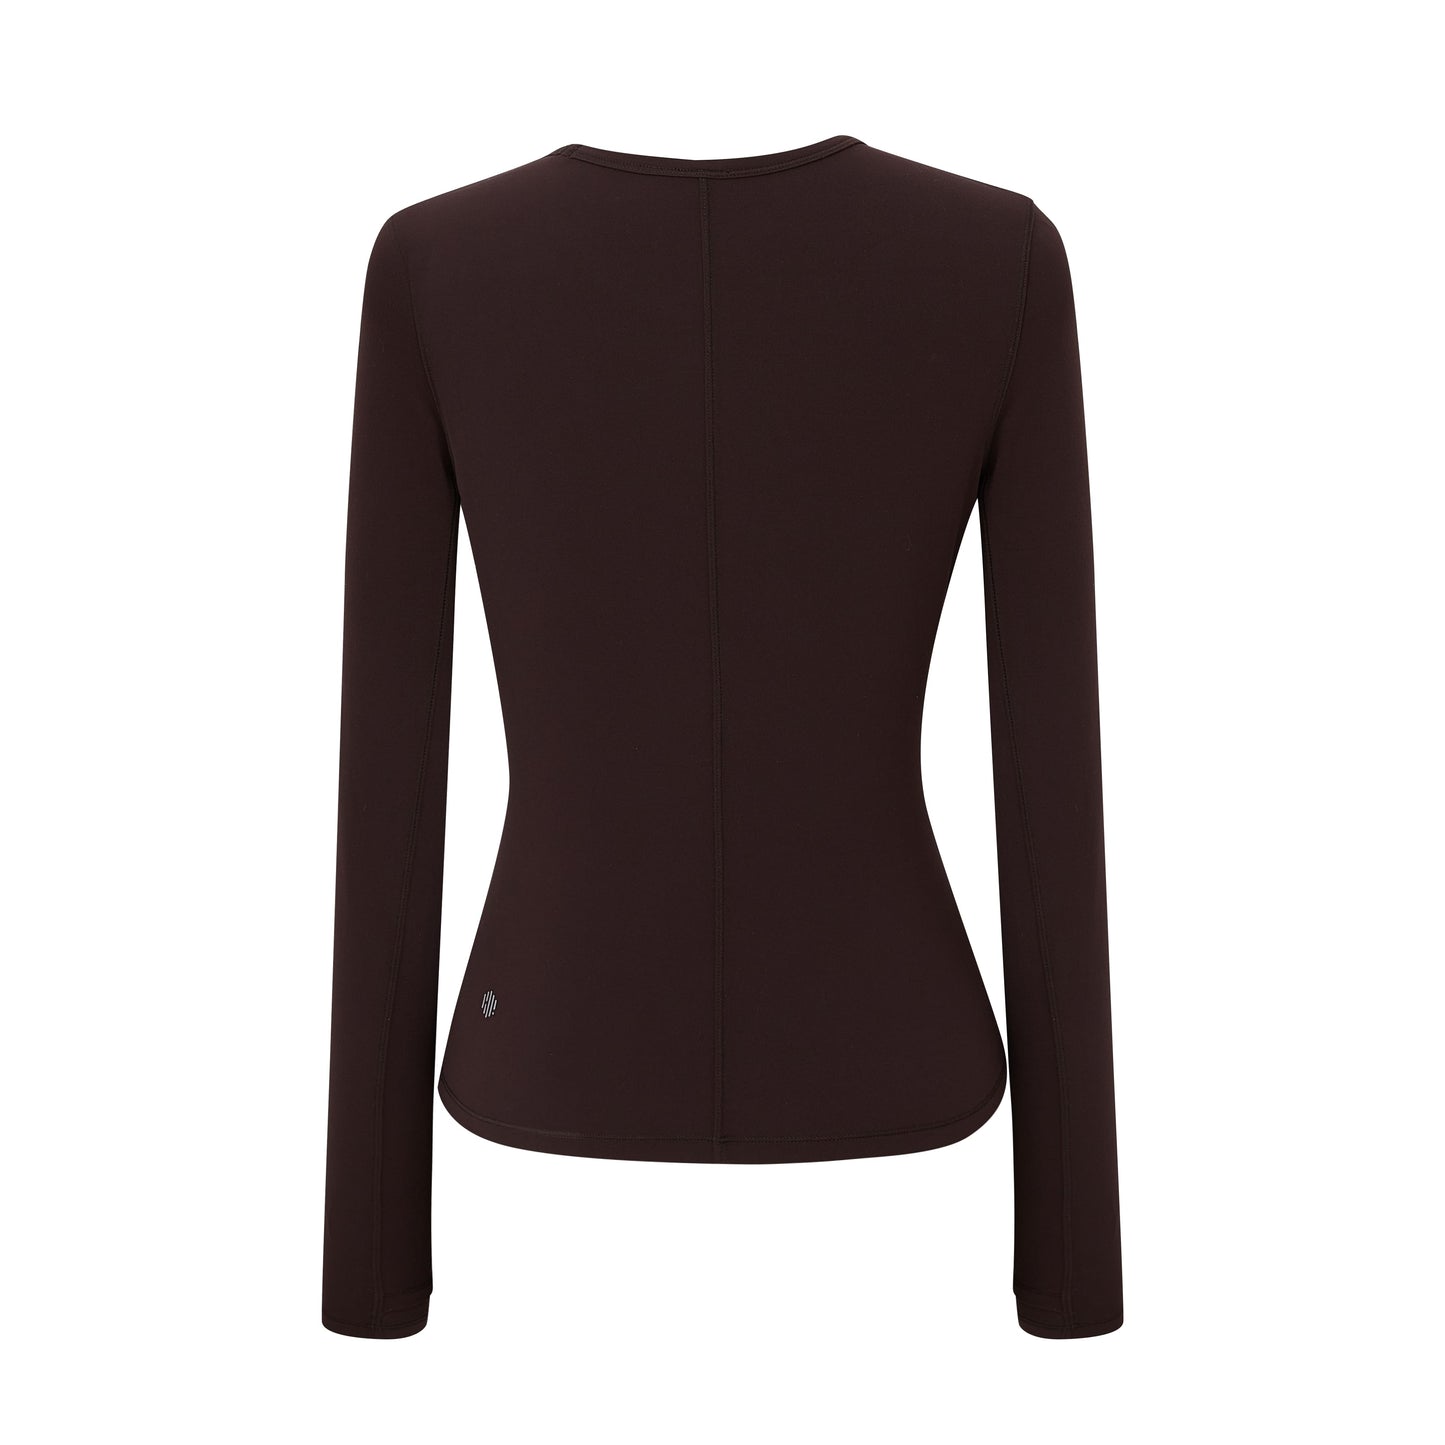 a brown mousse long sleeve sports top from back